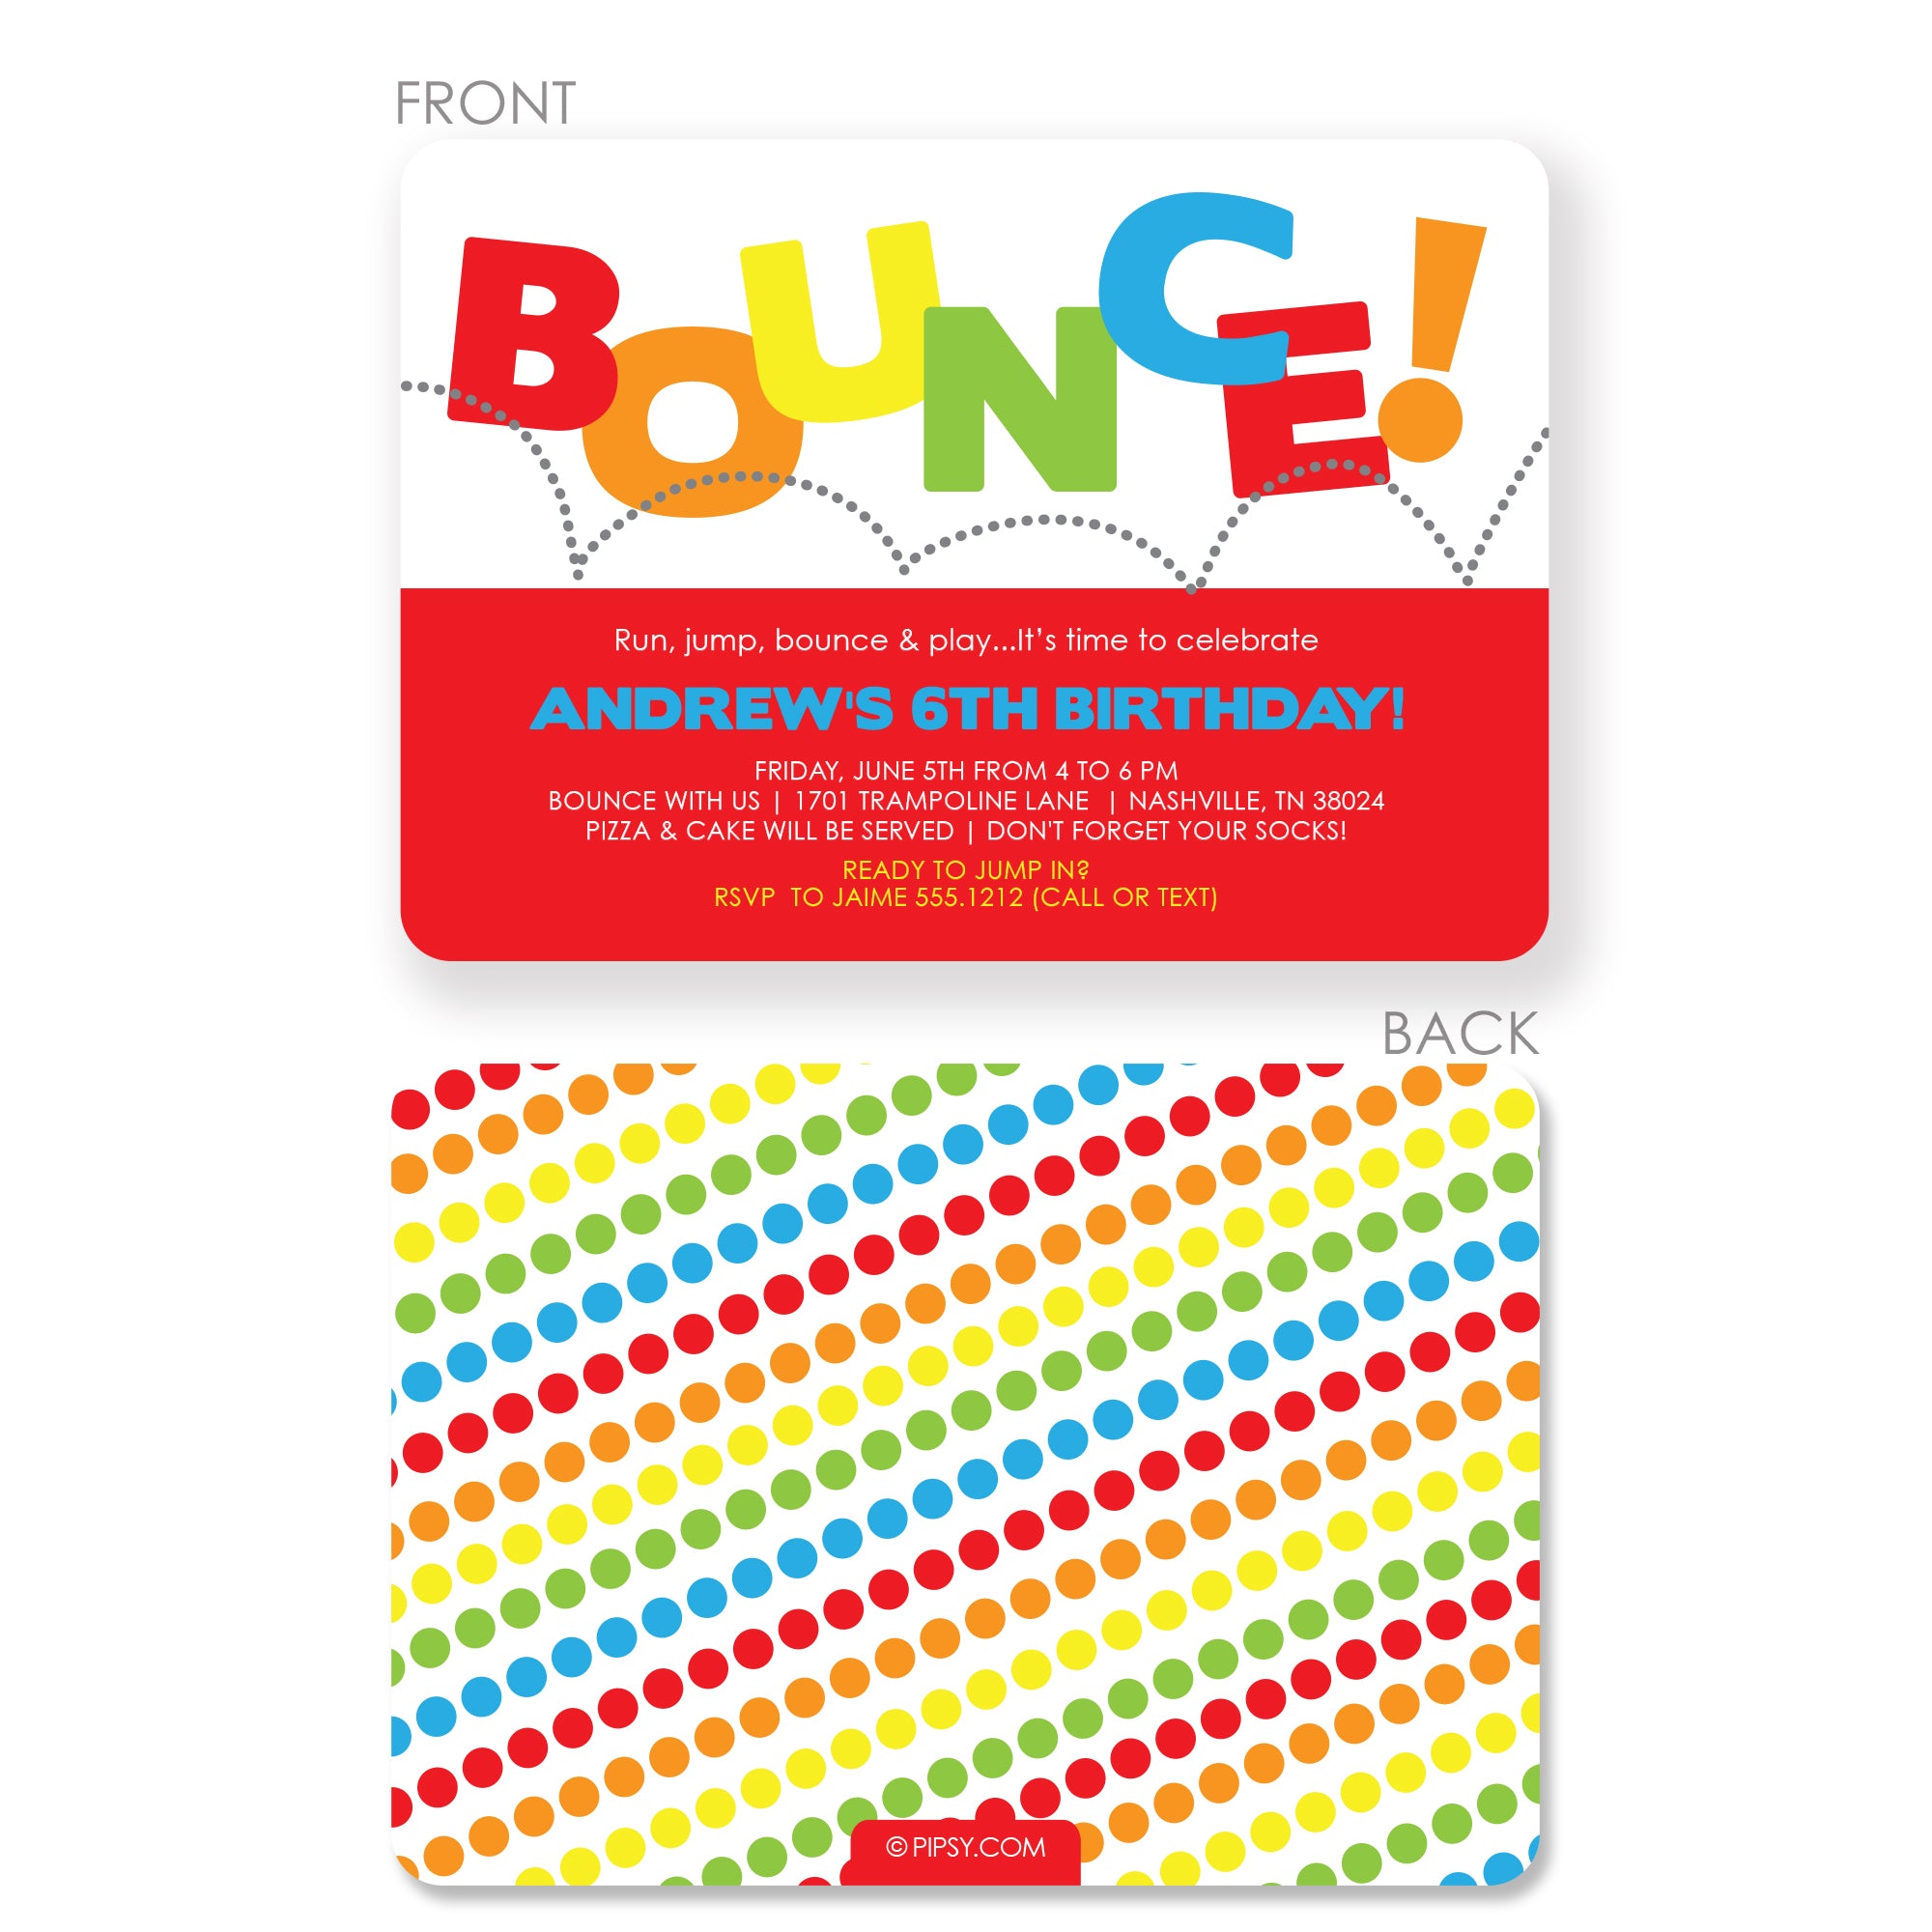 Bounce Birthday party invitation, printed on thick carstock, two sided printing with envelopes included, great for all ages